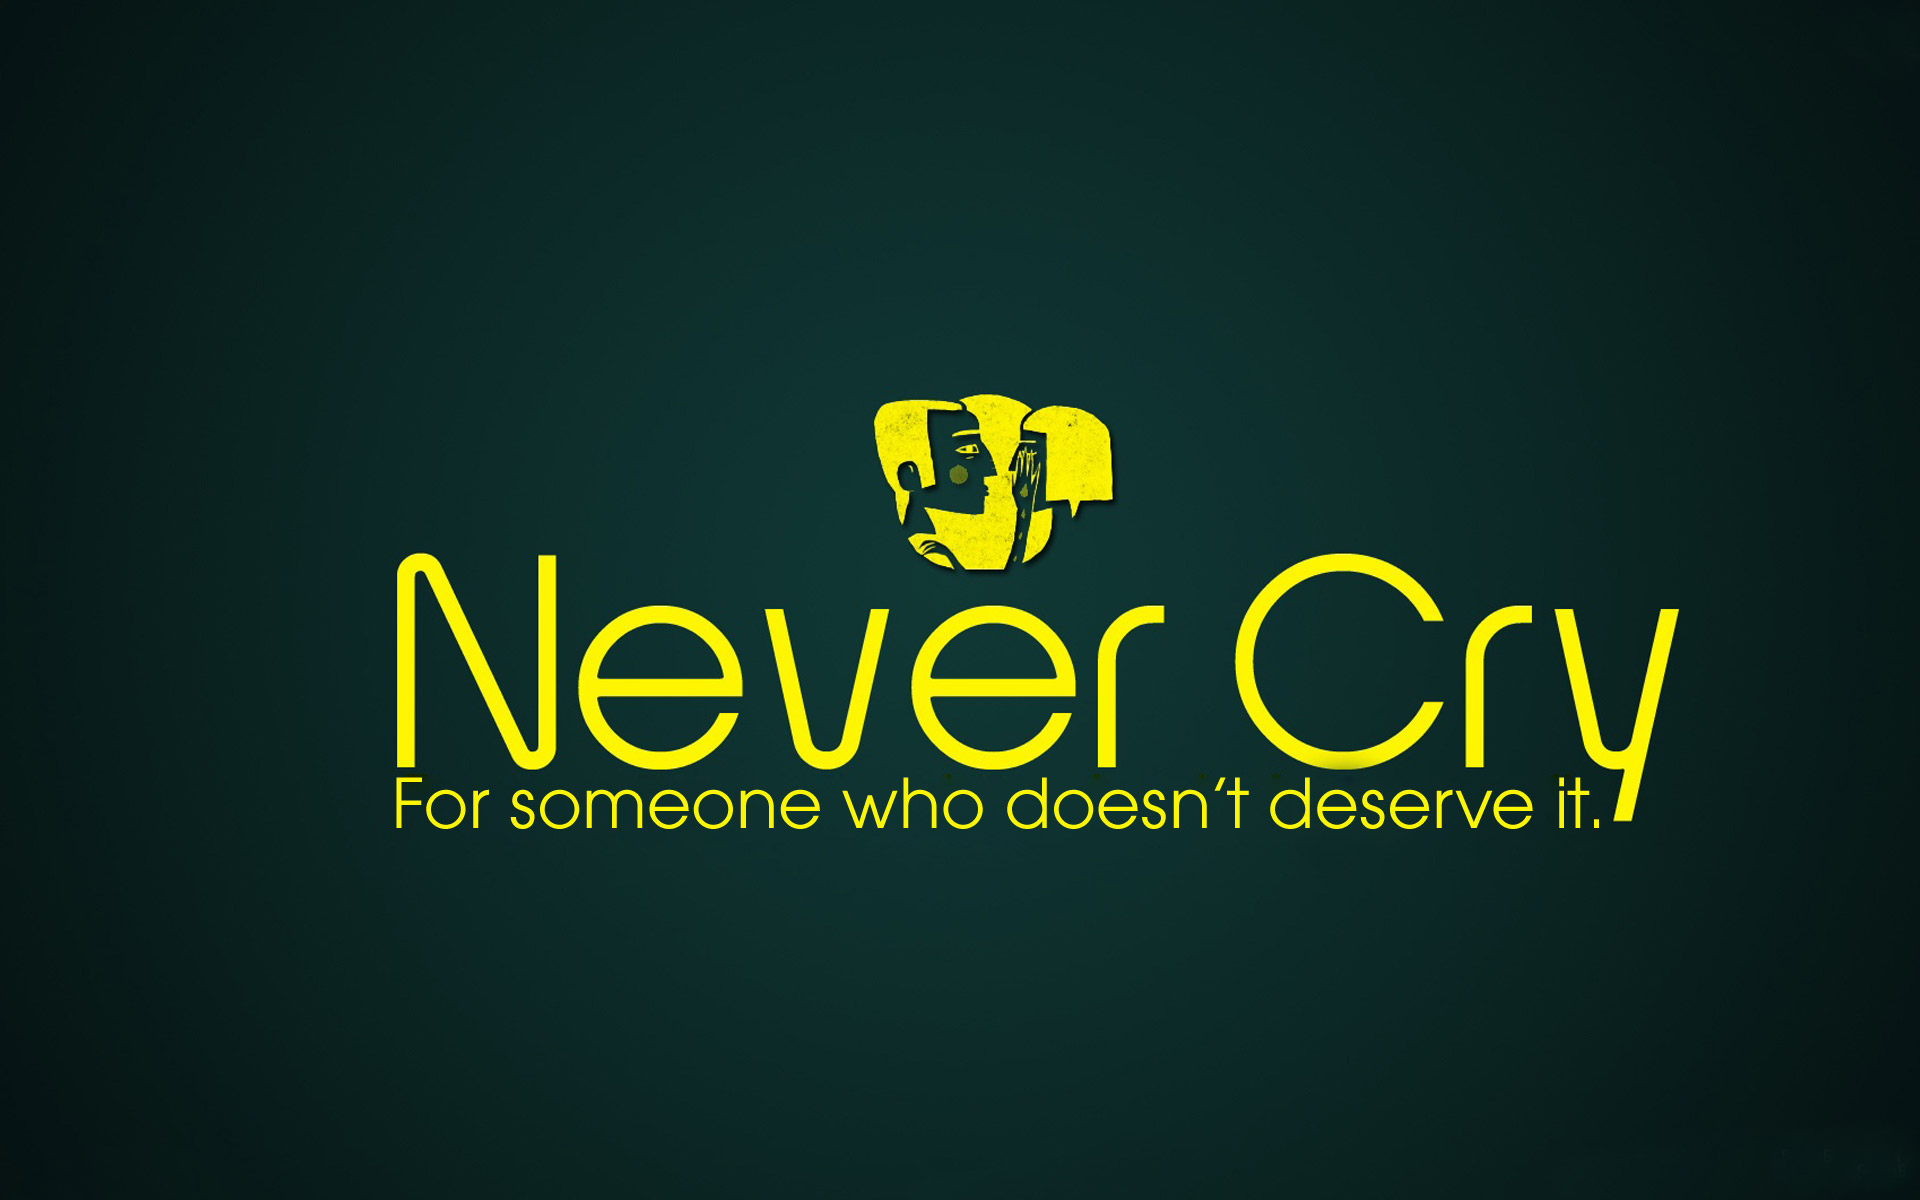 Quotes pictures hd never cry - Best For Desktop HD Backgrounds